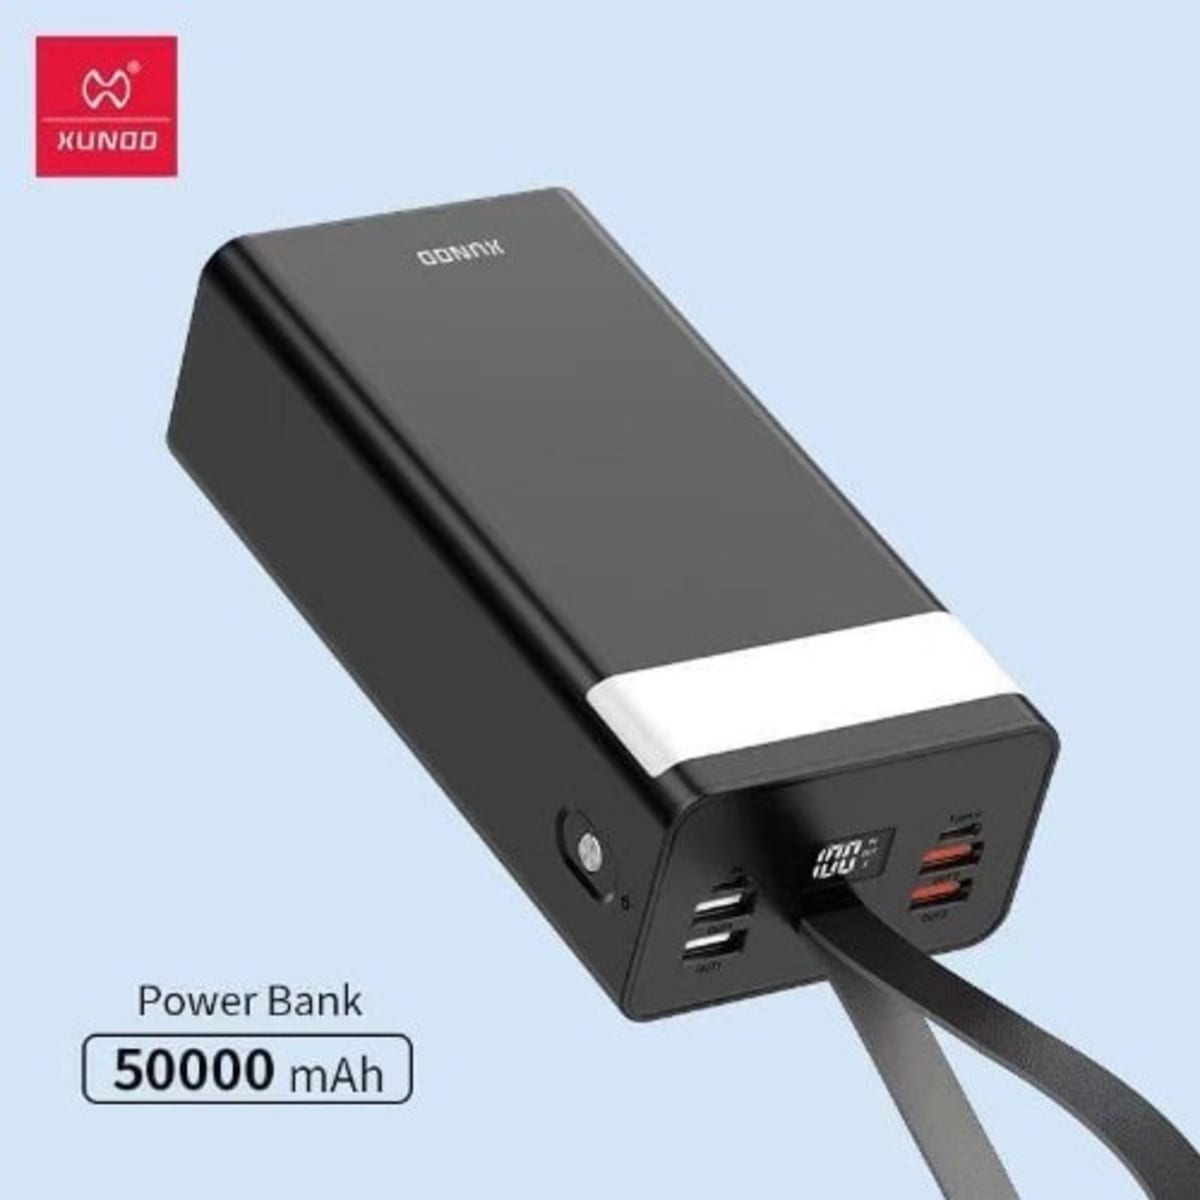 Uganda Powerful & Reliable Charging: 50000mah Powerbank Charges Phones 15x  & More with 4 USB Ports